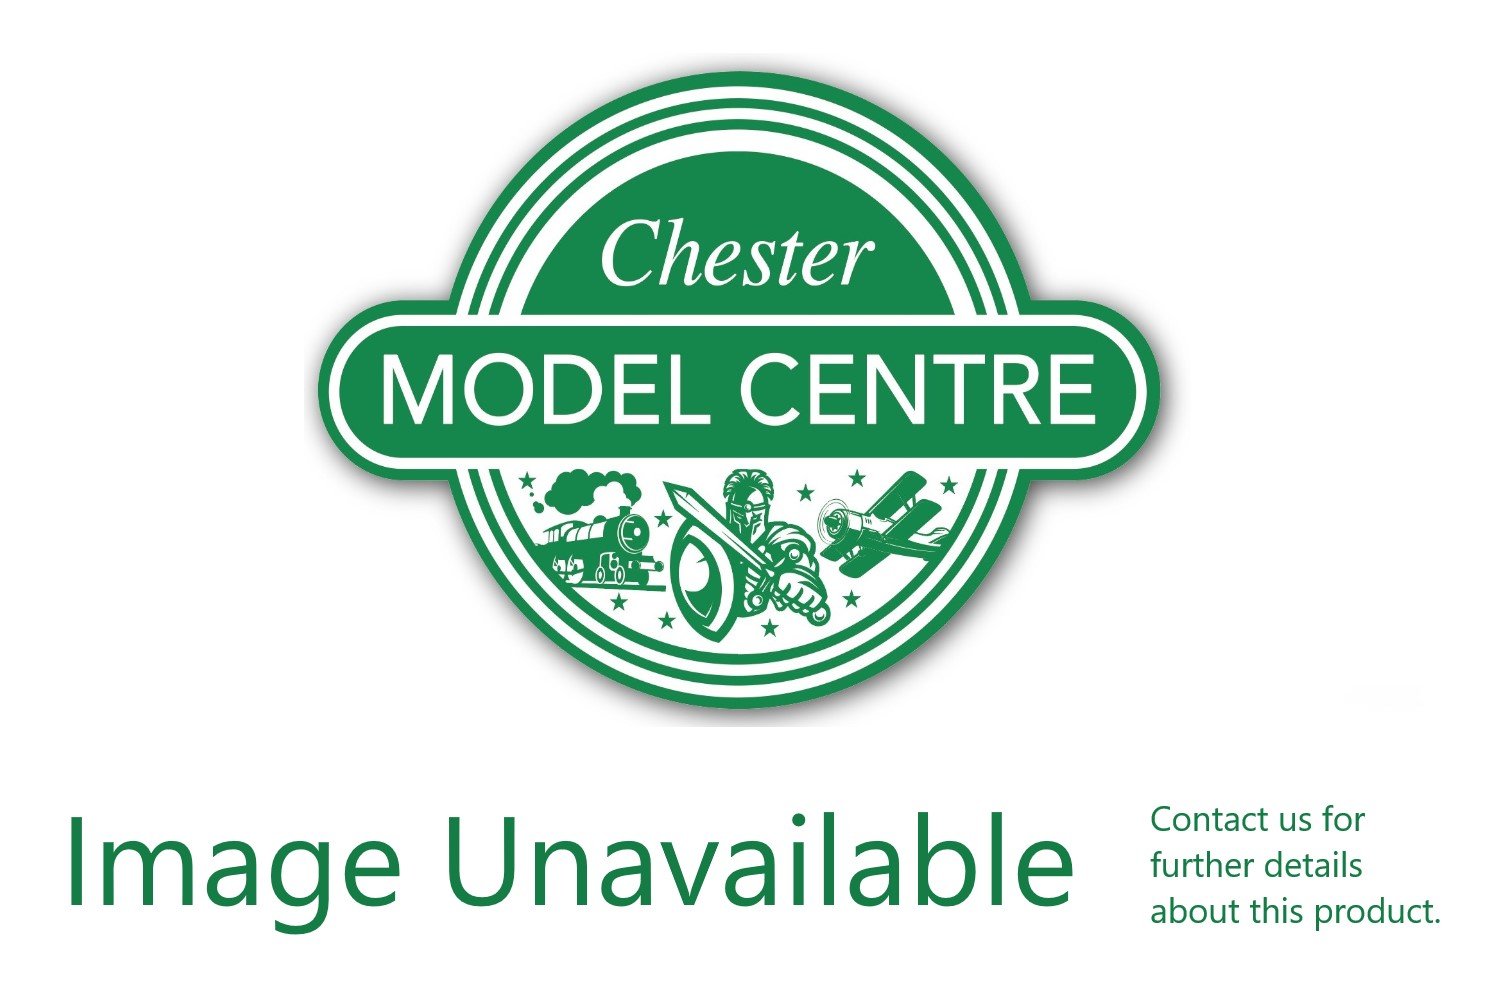 Carriage Shed - Chester Model Centre